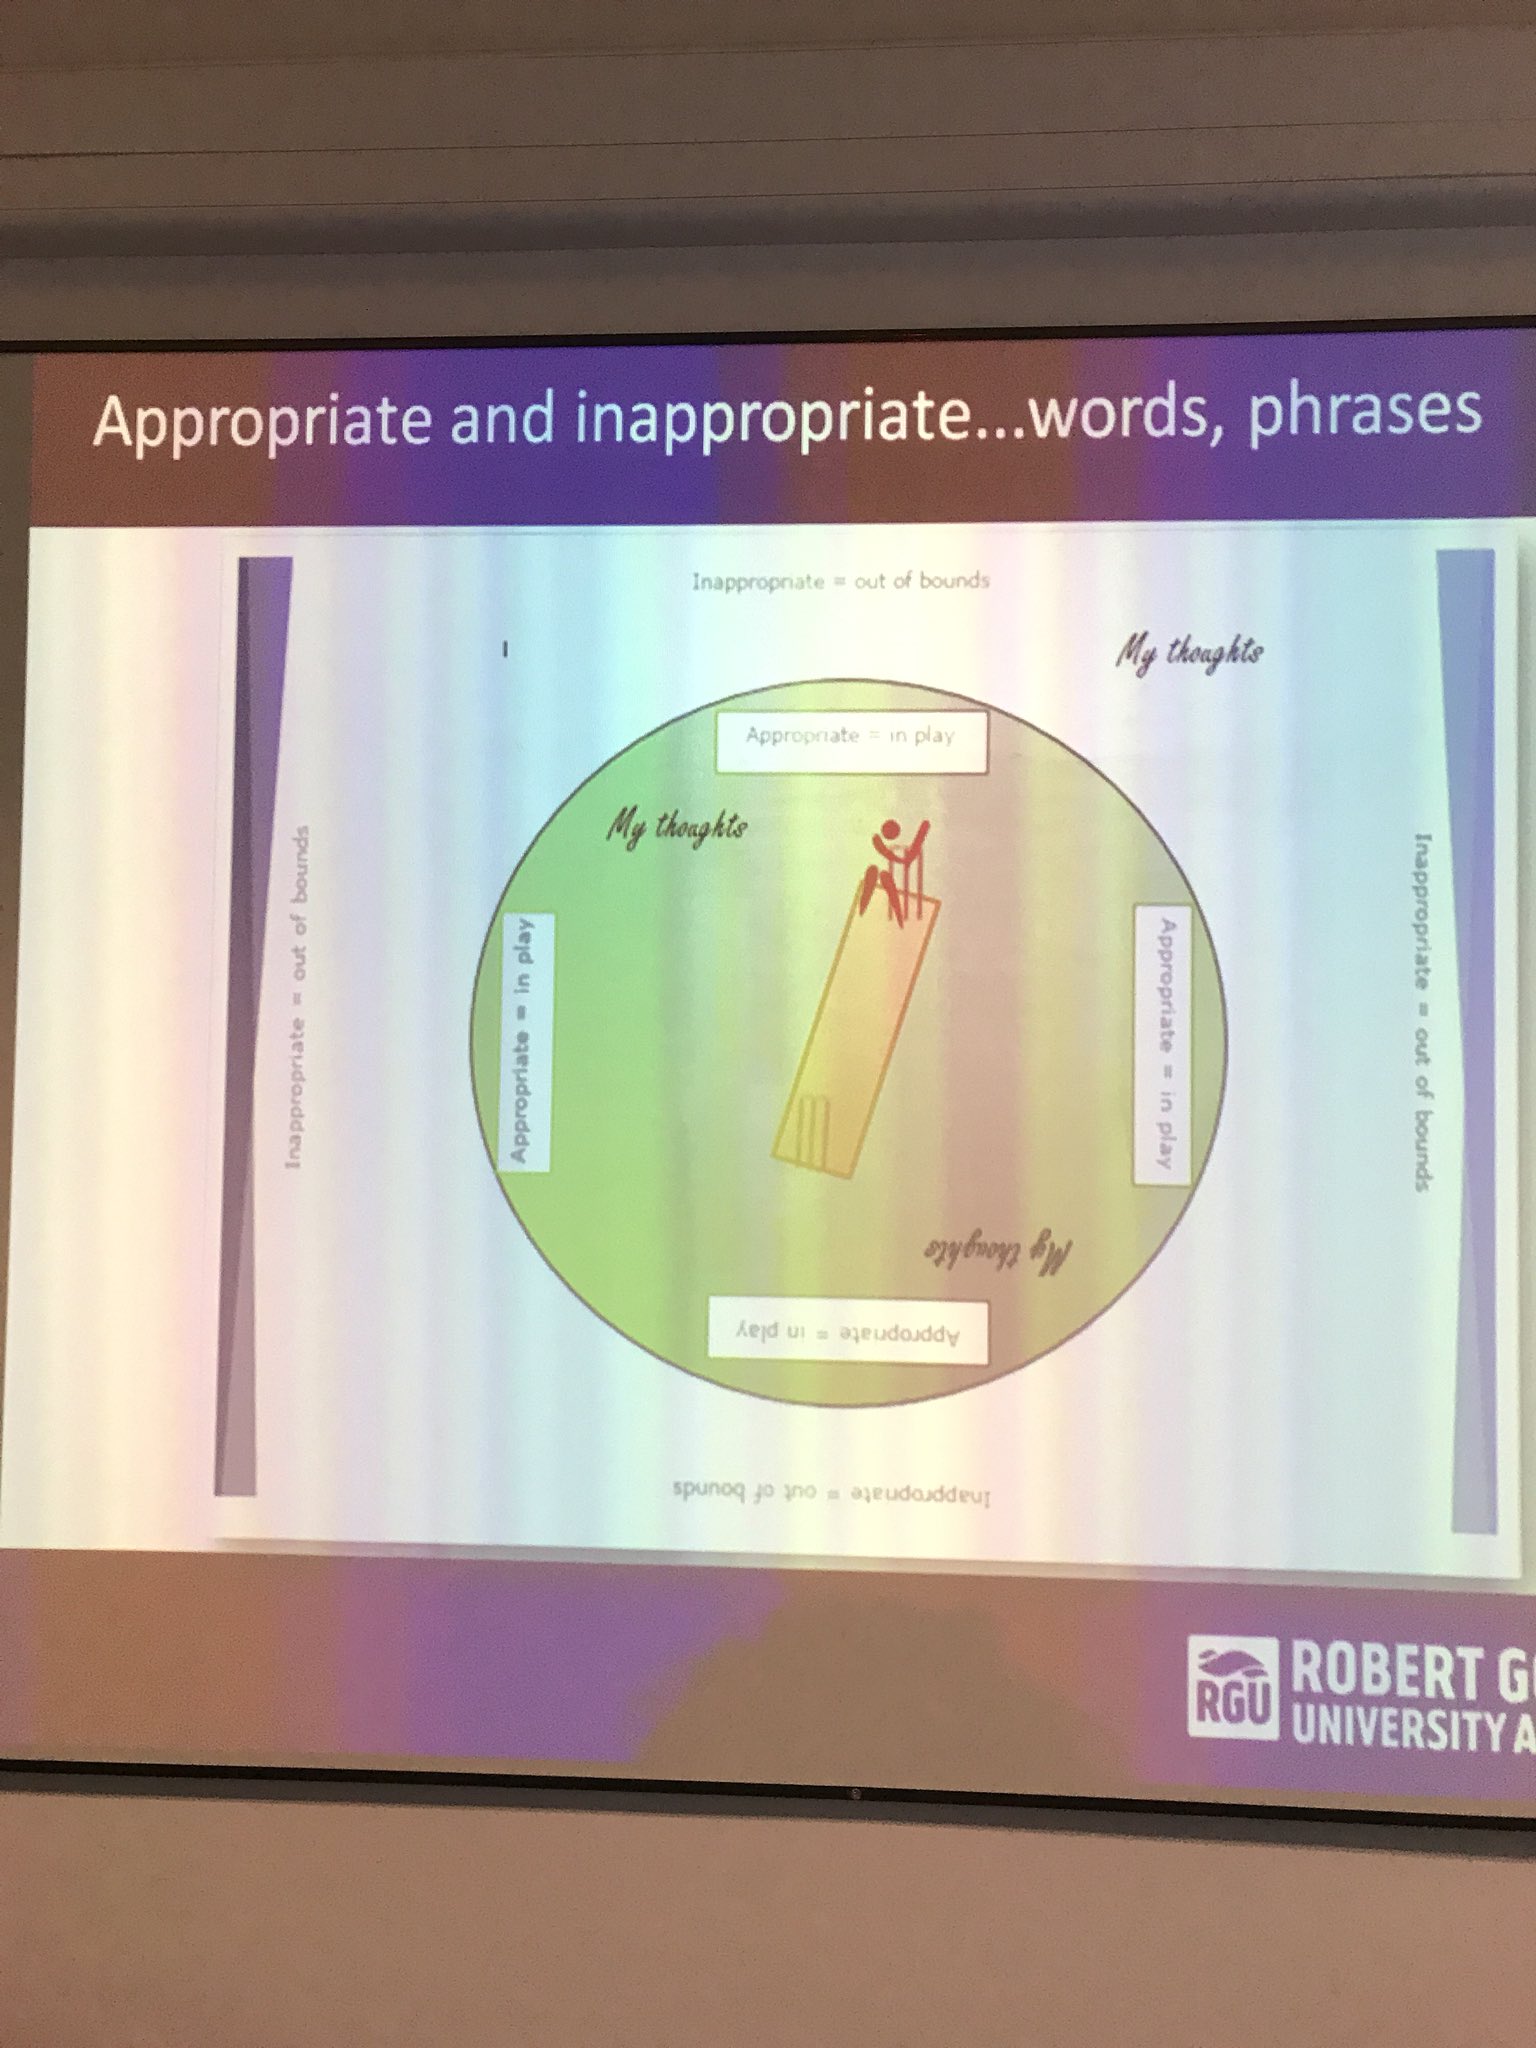 Love the analogy of cricket boundaries for what’s appropriate and not appropriate in use of social media by health care professional #SocMedHE17 @alyjbrown https://t.co/Z55EleQr6D